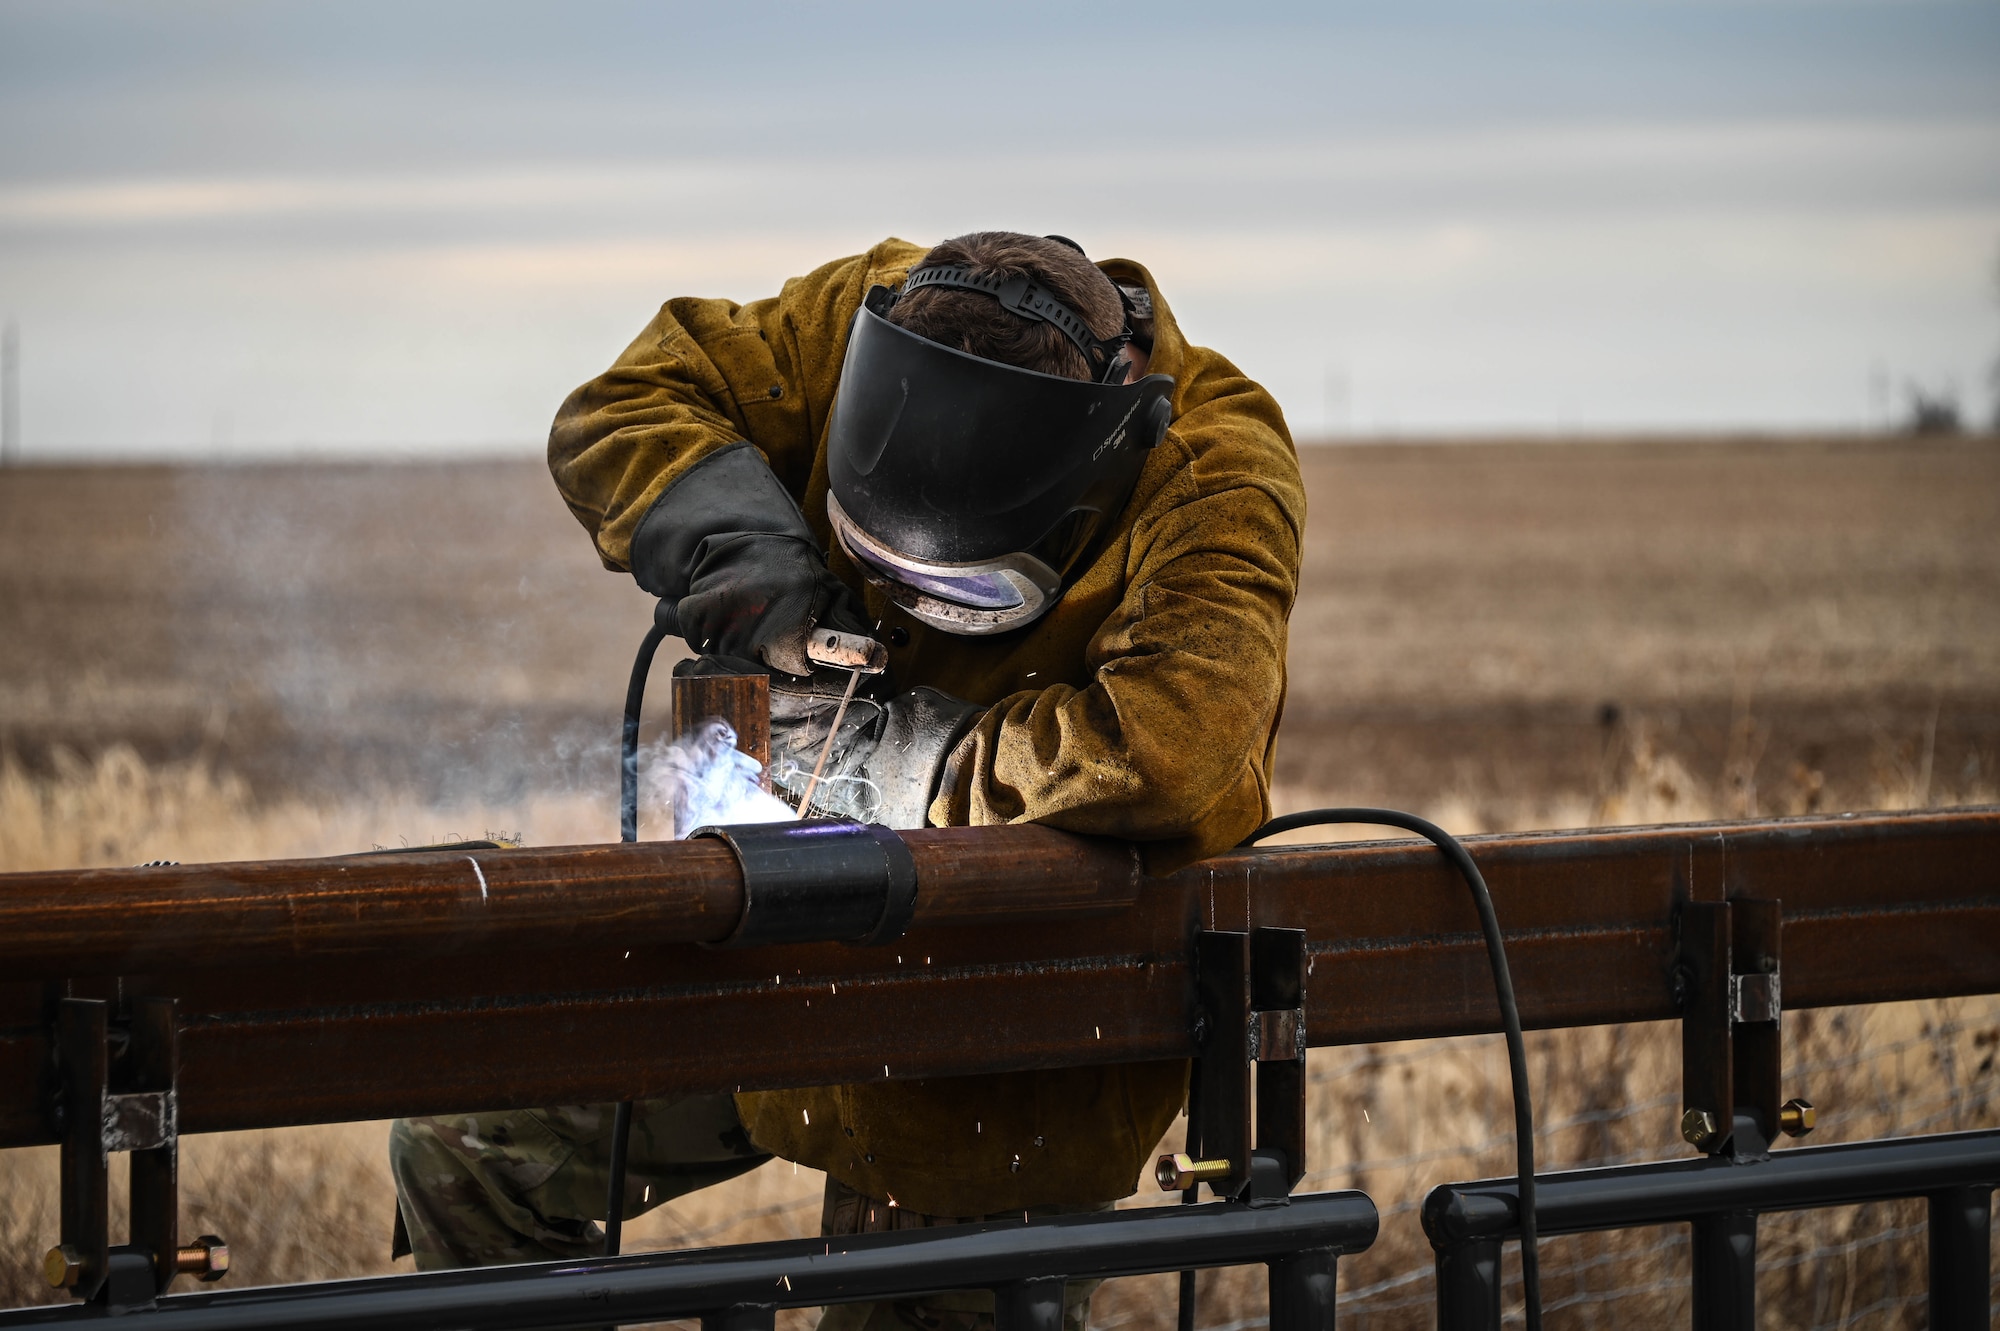 U.S. Air Force Airman 1st Class Blake Silvis, 97th Civil Engineering Squadron structural craftsman, welds a part of the fence at Altus Air Force Base, Oklahoma, Dec. 17, 2021. The “Dirt Boyz” are building and upgrading the fence around the perimeter of the base. (U.S. Air Force photo by Airman 1st Class Kayla Christenson)